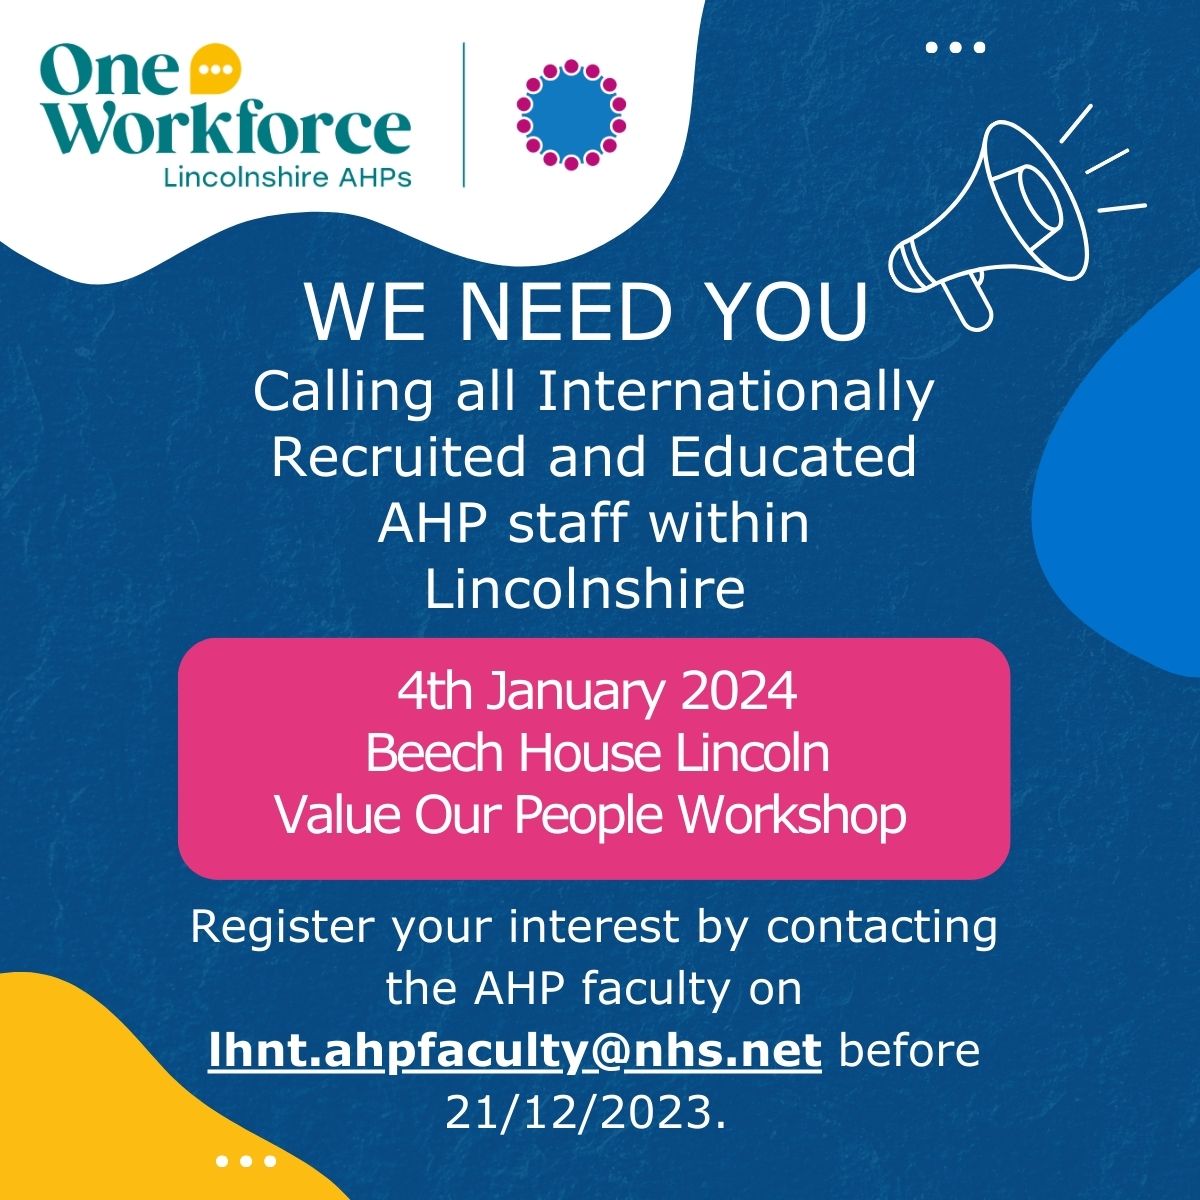 WE NEED YOU! Calling all Internationally Recruited and Educated AHP staff within Lincolnshire. Please join the discussion so you can contribute to giving your viewpoints at our Value our People Workshop. For more information please email lhnt.ahpfaculty@nhs.net.